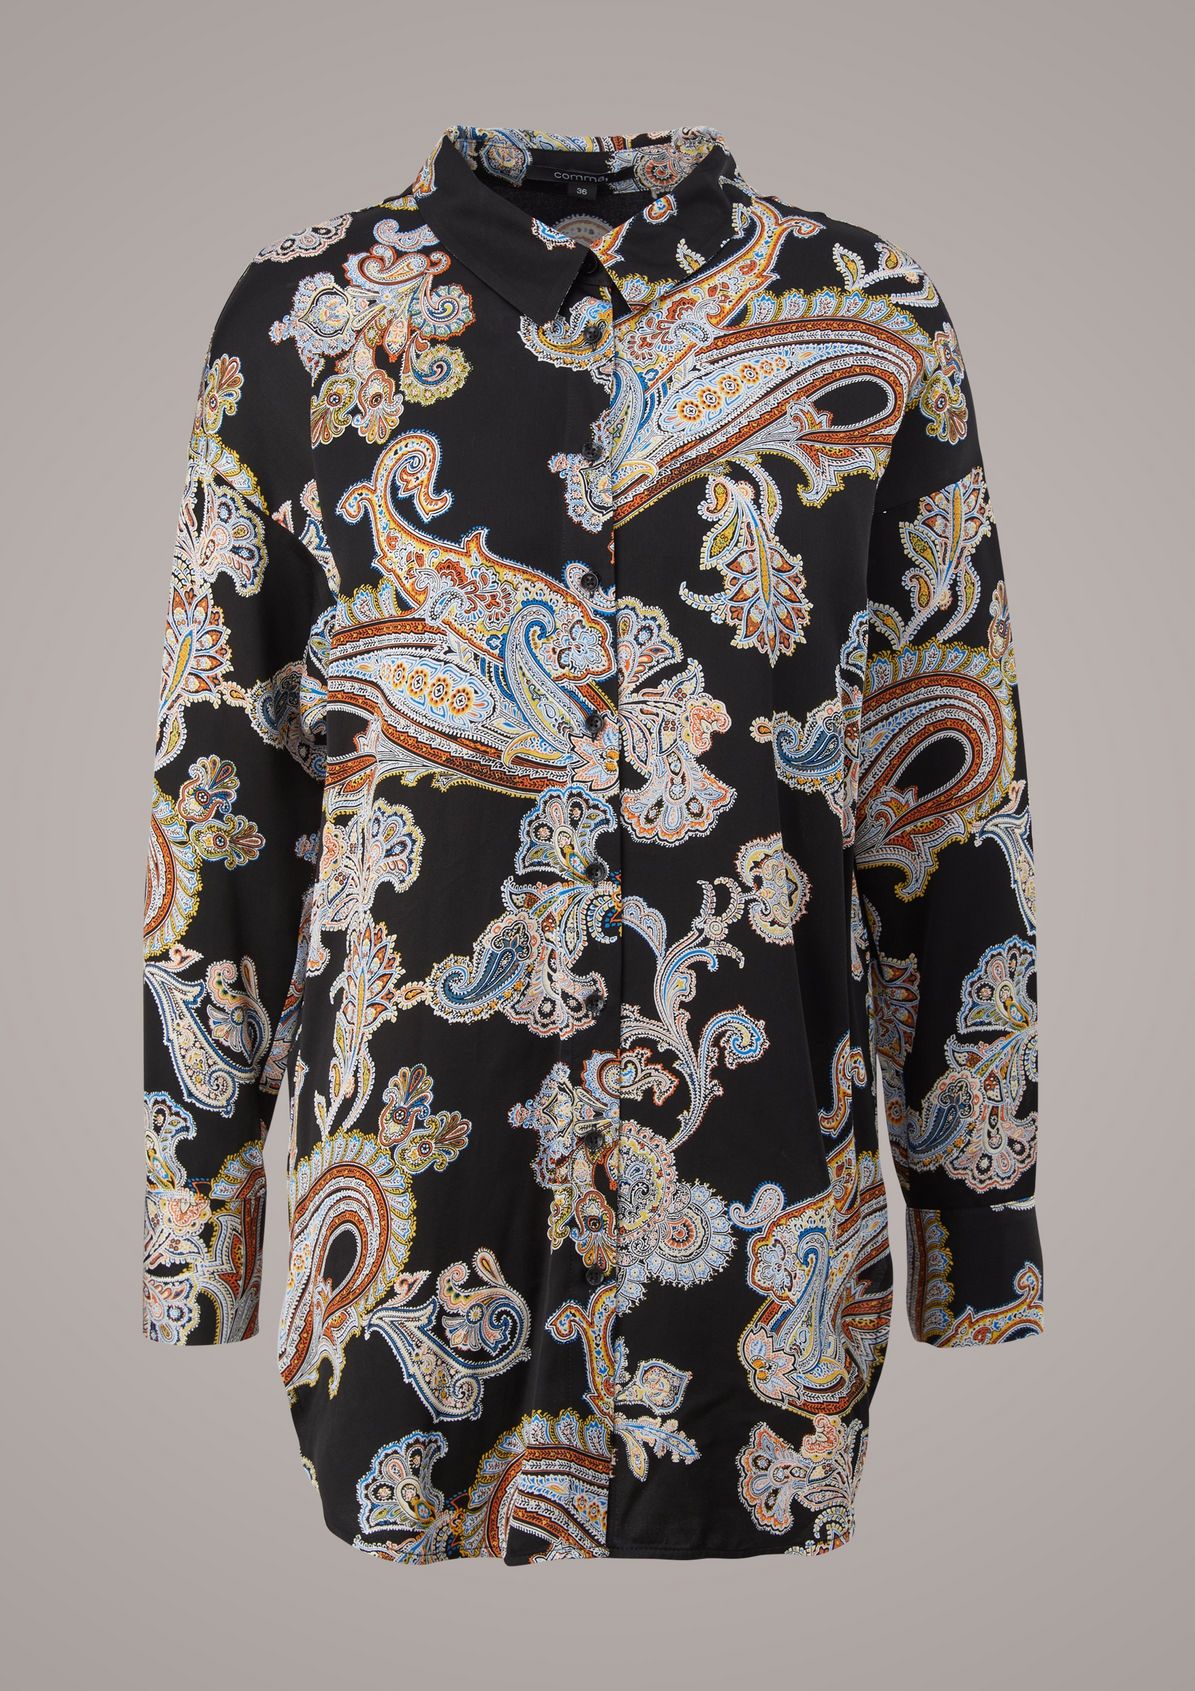 Paisley blouse made of viscose from comma